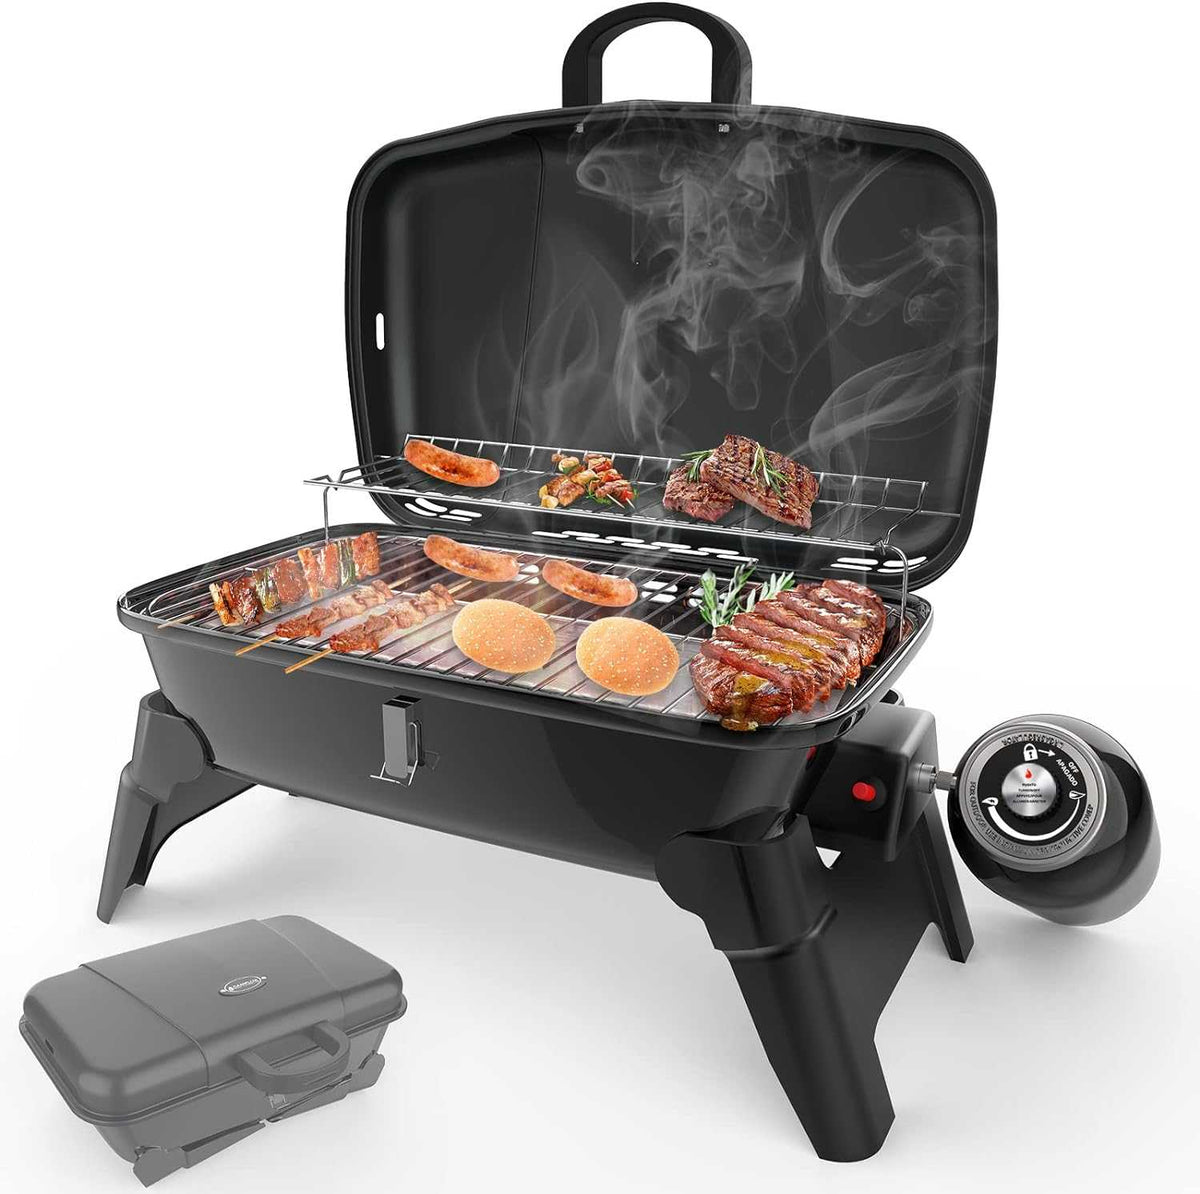 Camplux Portable Gas Grill 189 Square Inches, Small Propane Grill for Camping, Outdoor Cooking